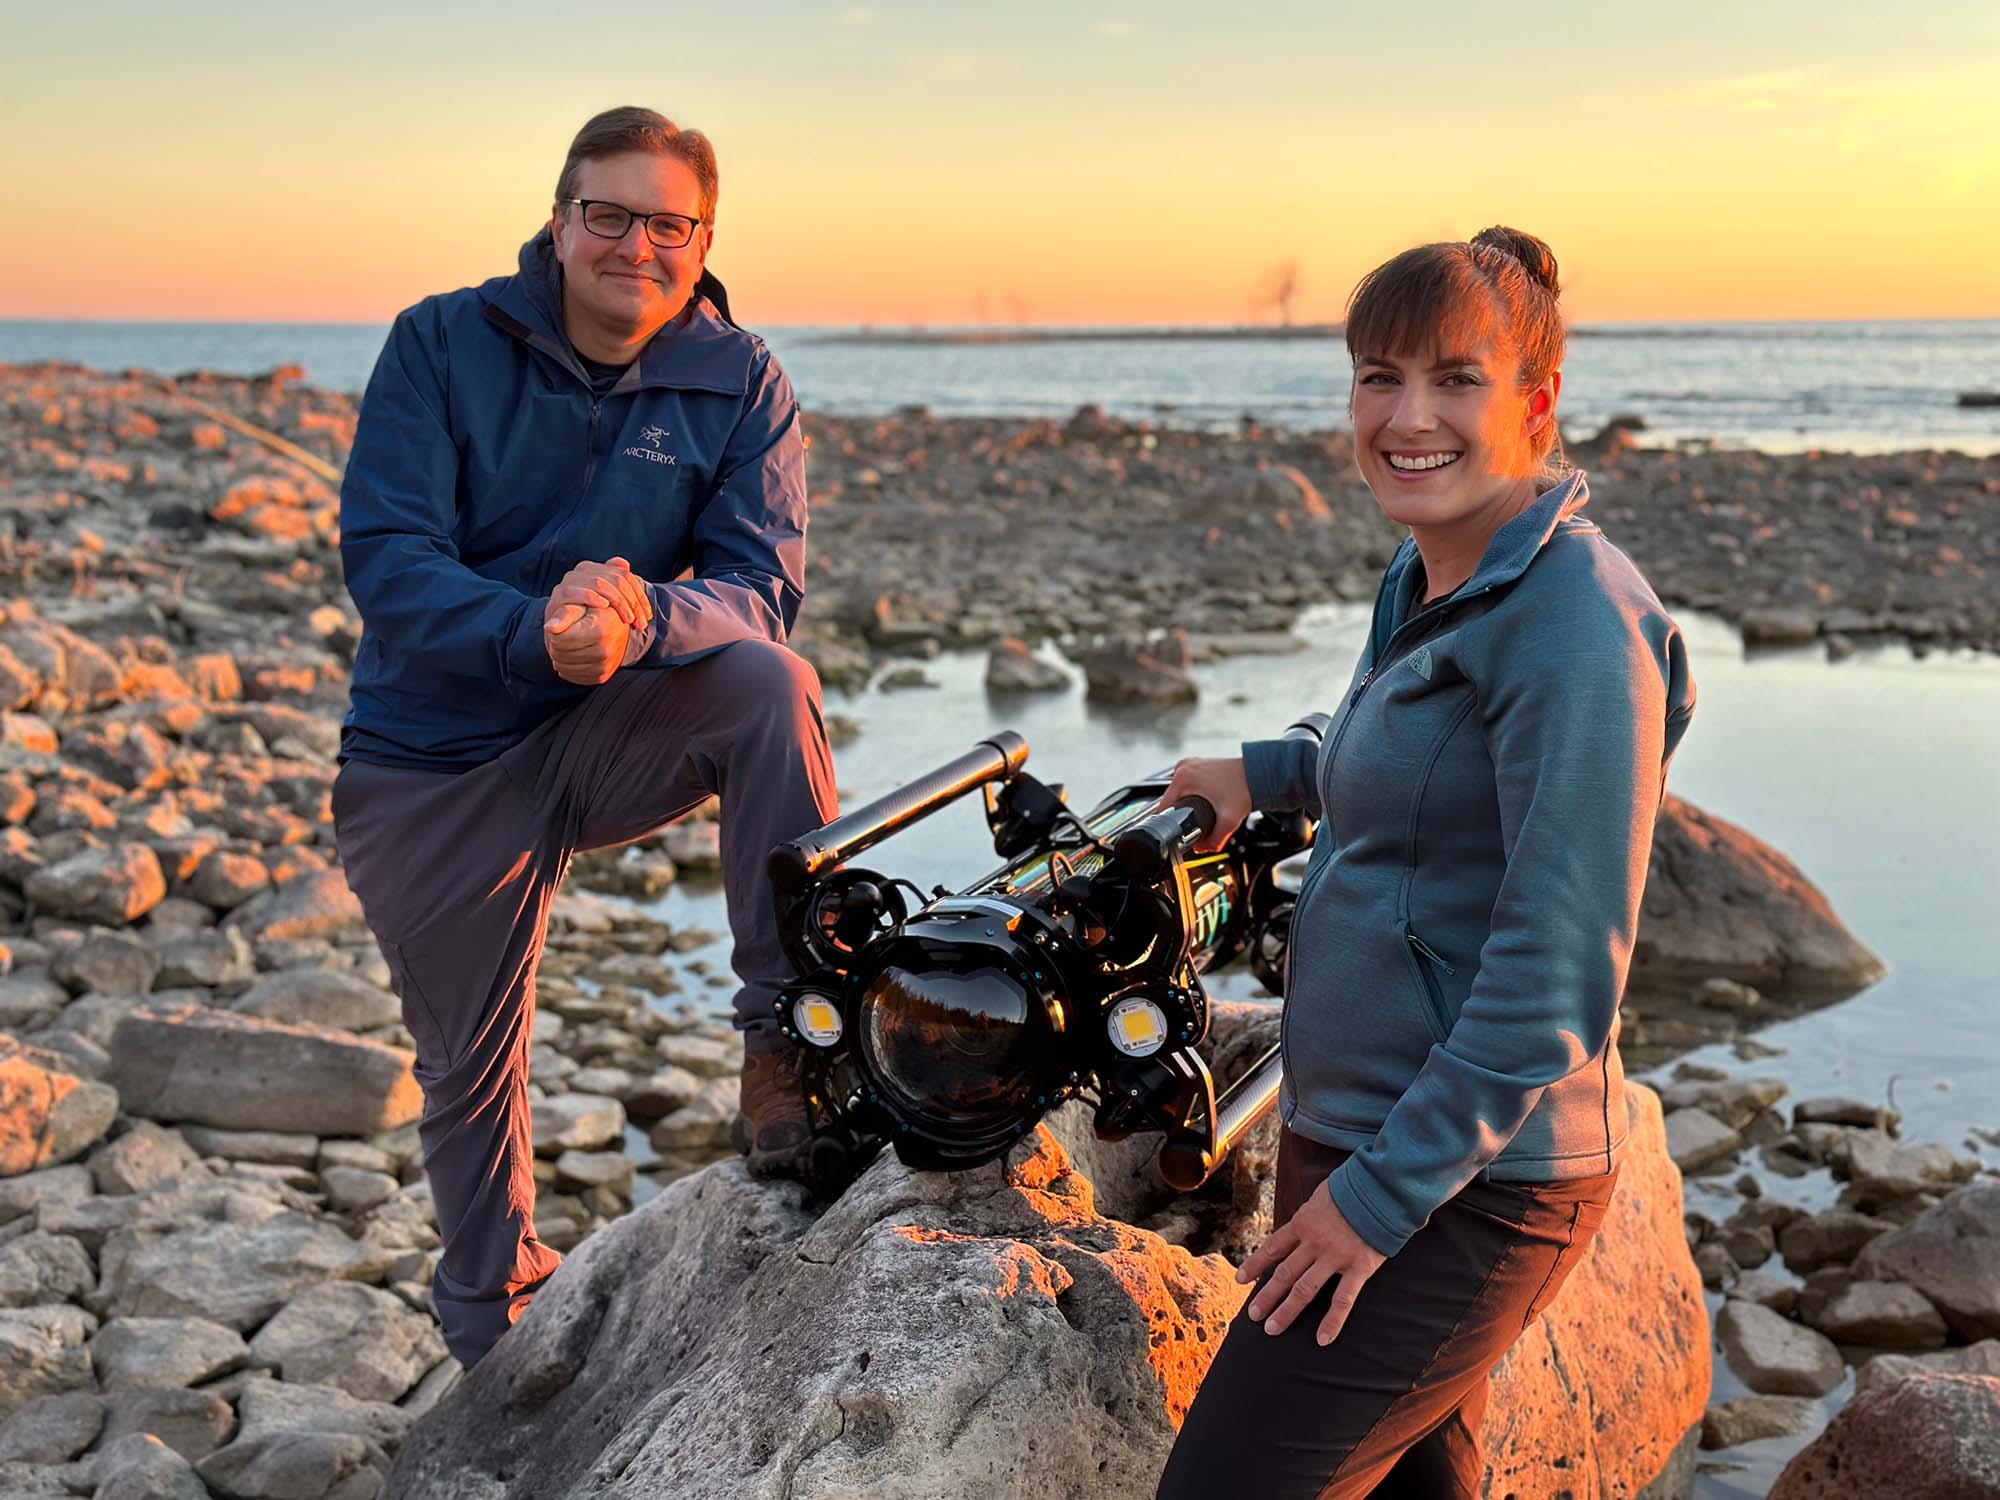 "All Too Clear" Co-directors with their ROV Boxfish Luna